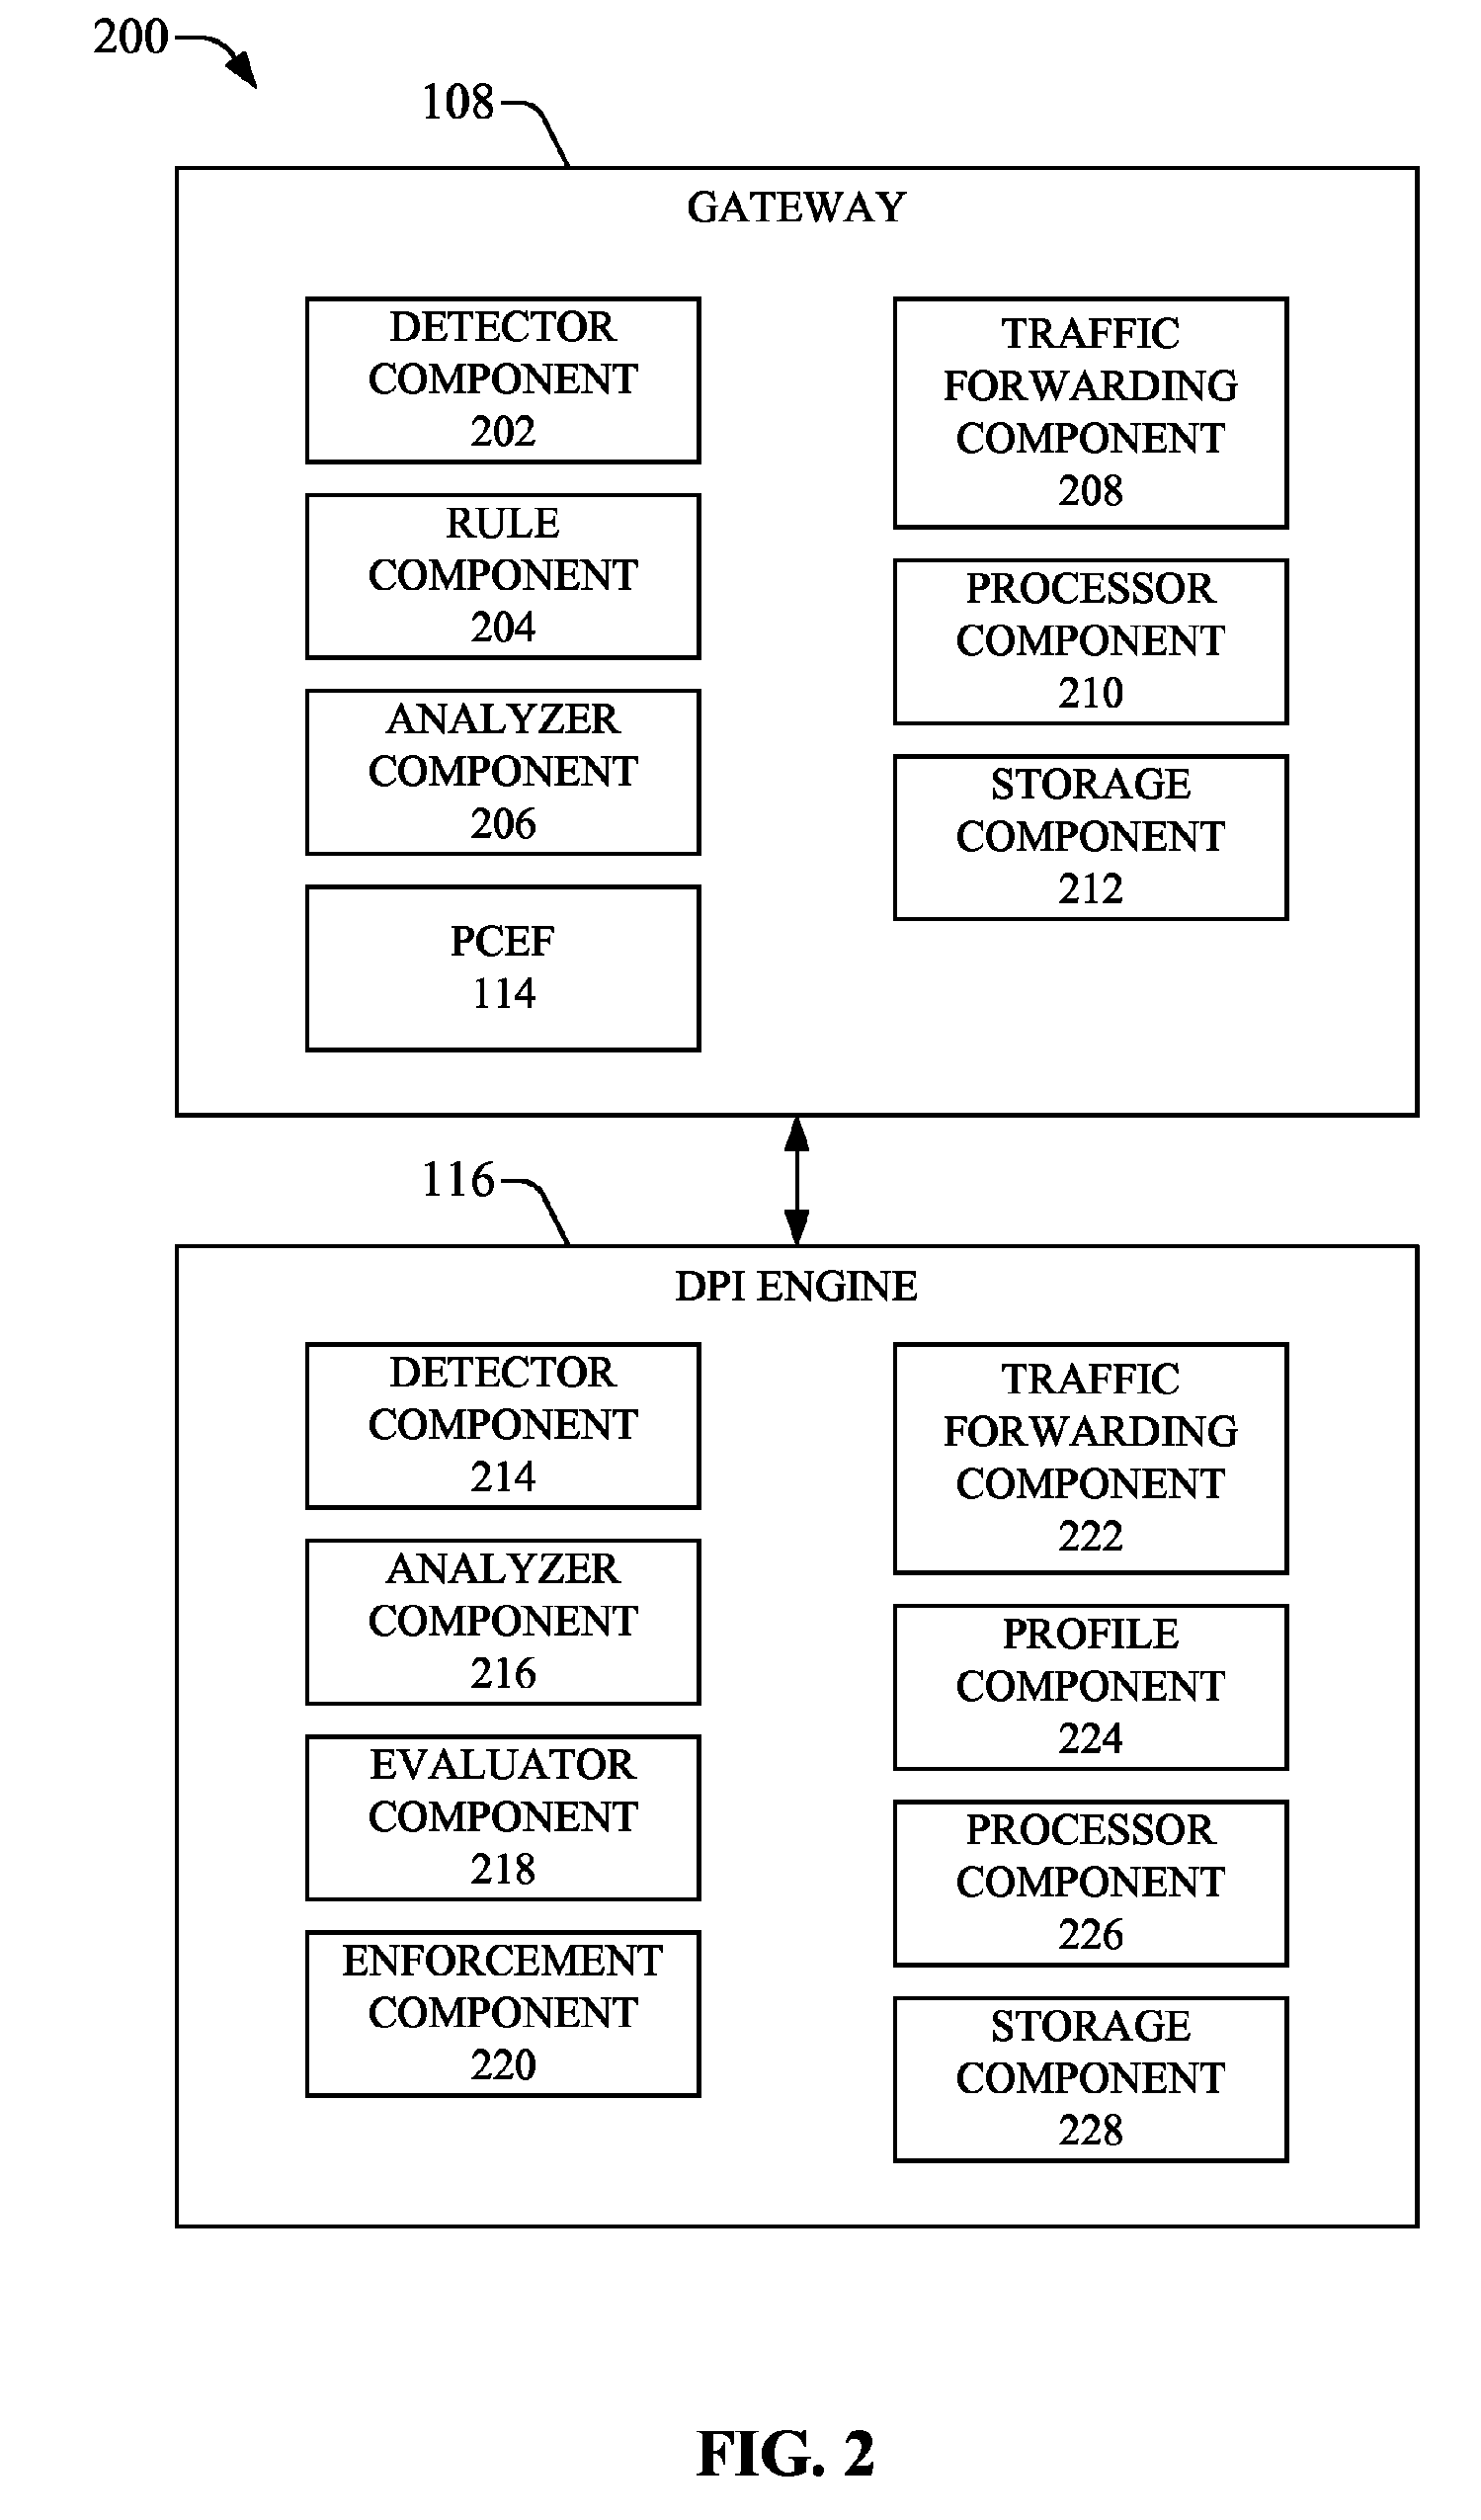 Policy-based privacy protection in converged communication networks